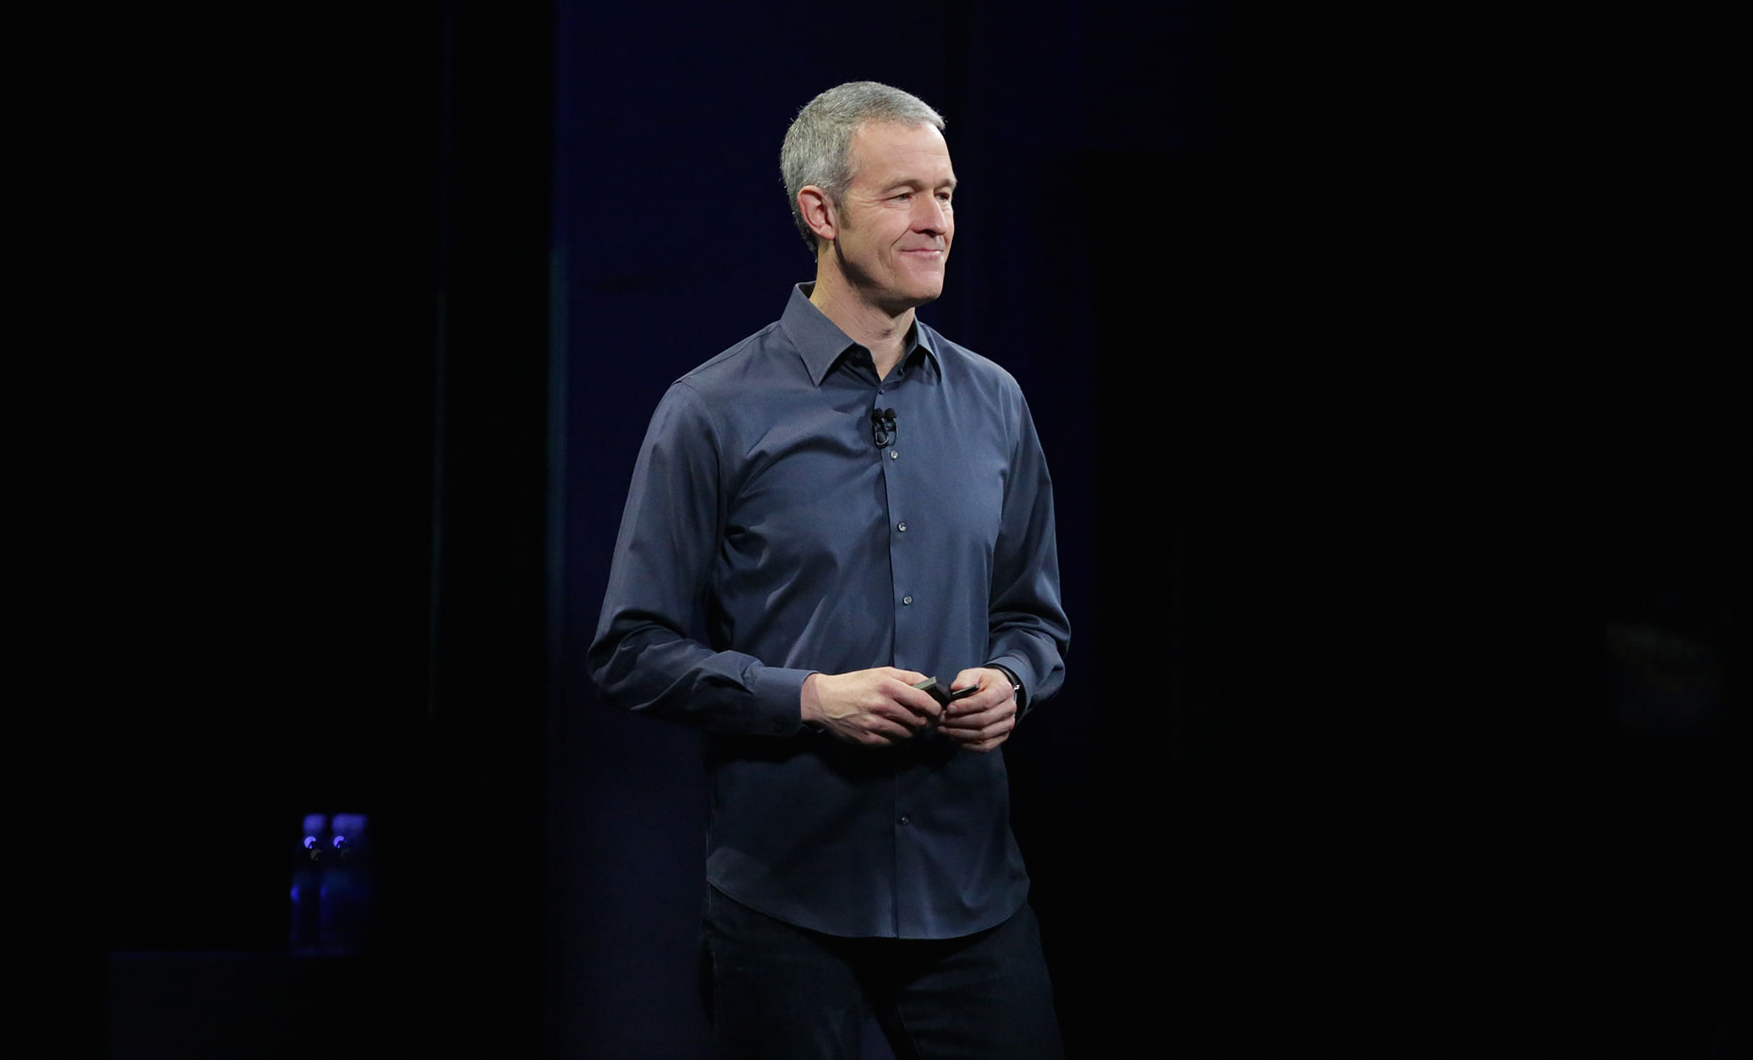 Apple sees its mobile devices as platform for artificial intelligence